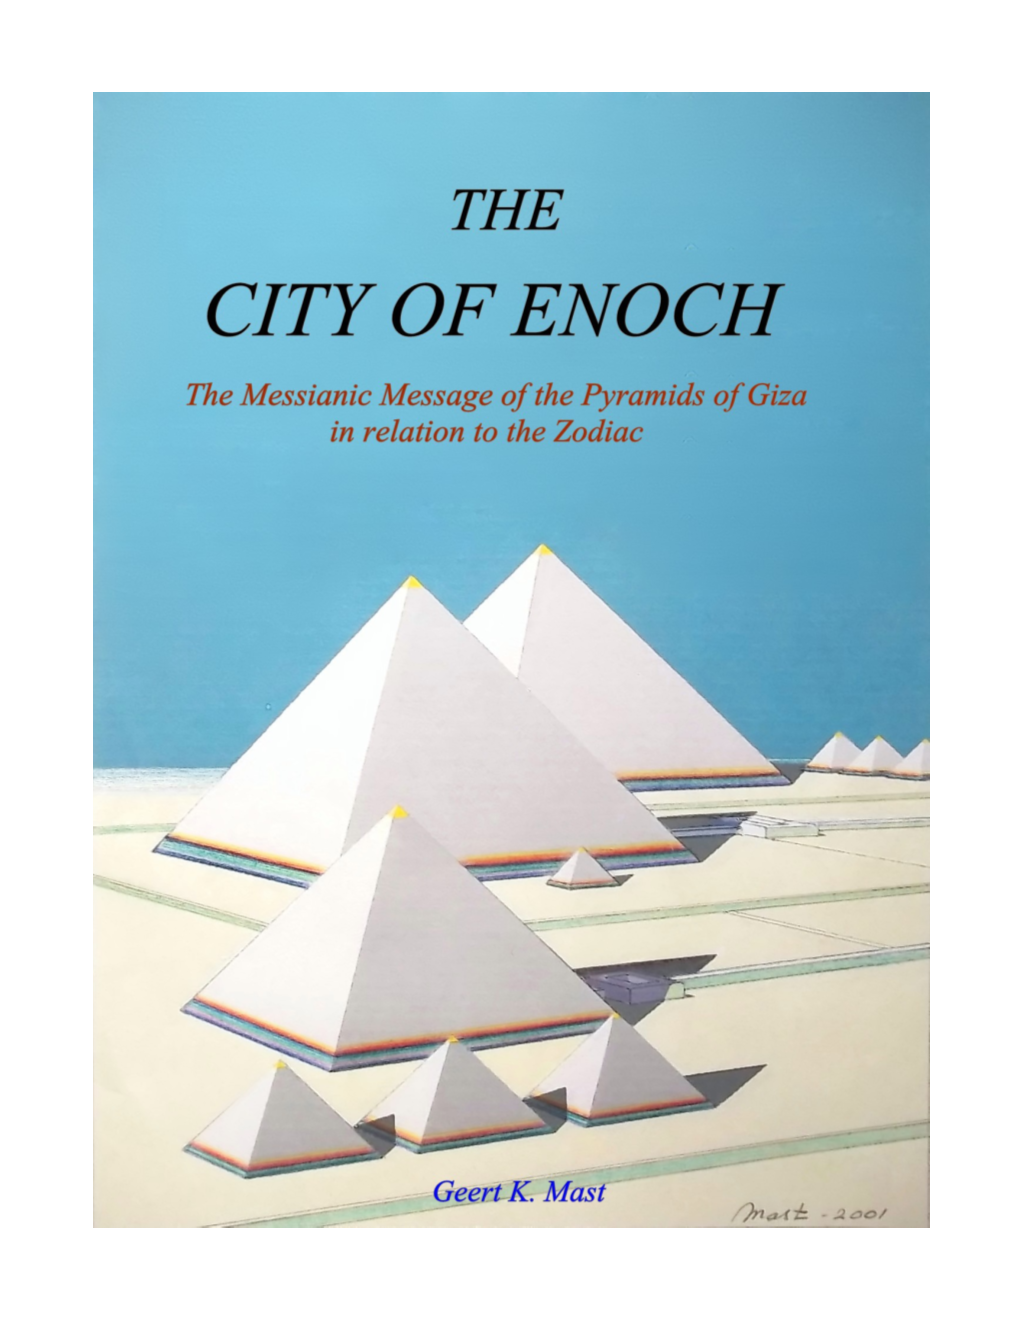 The City of Enoch